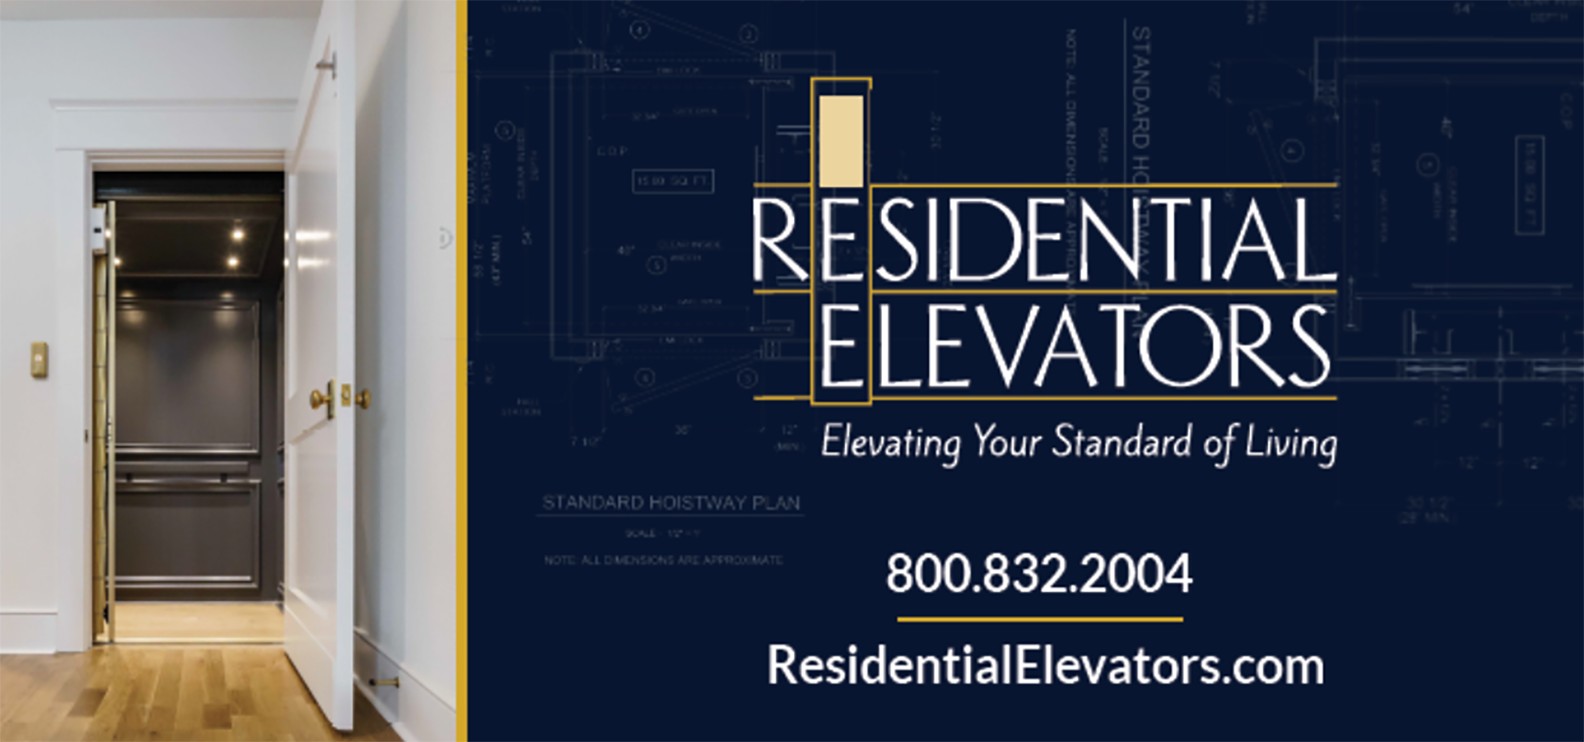 Elevator Lifts For Homes St. George, UT thumbnail